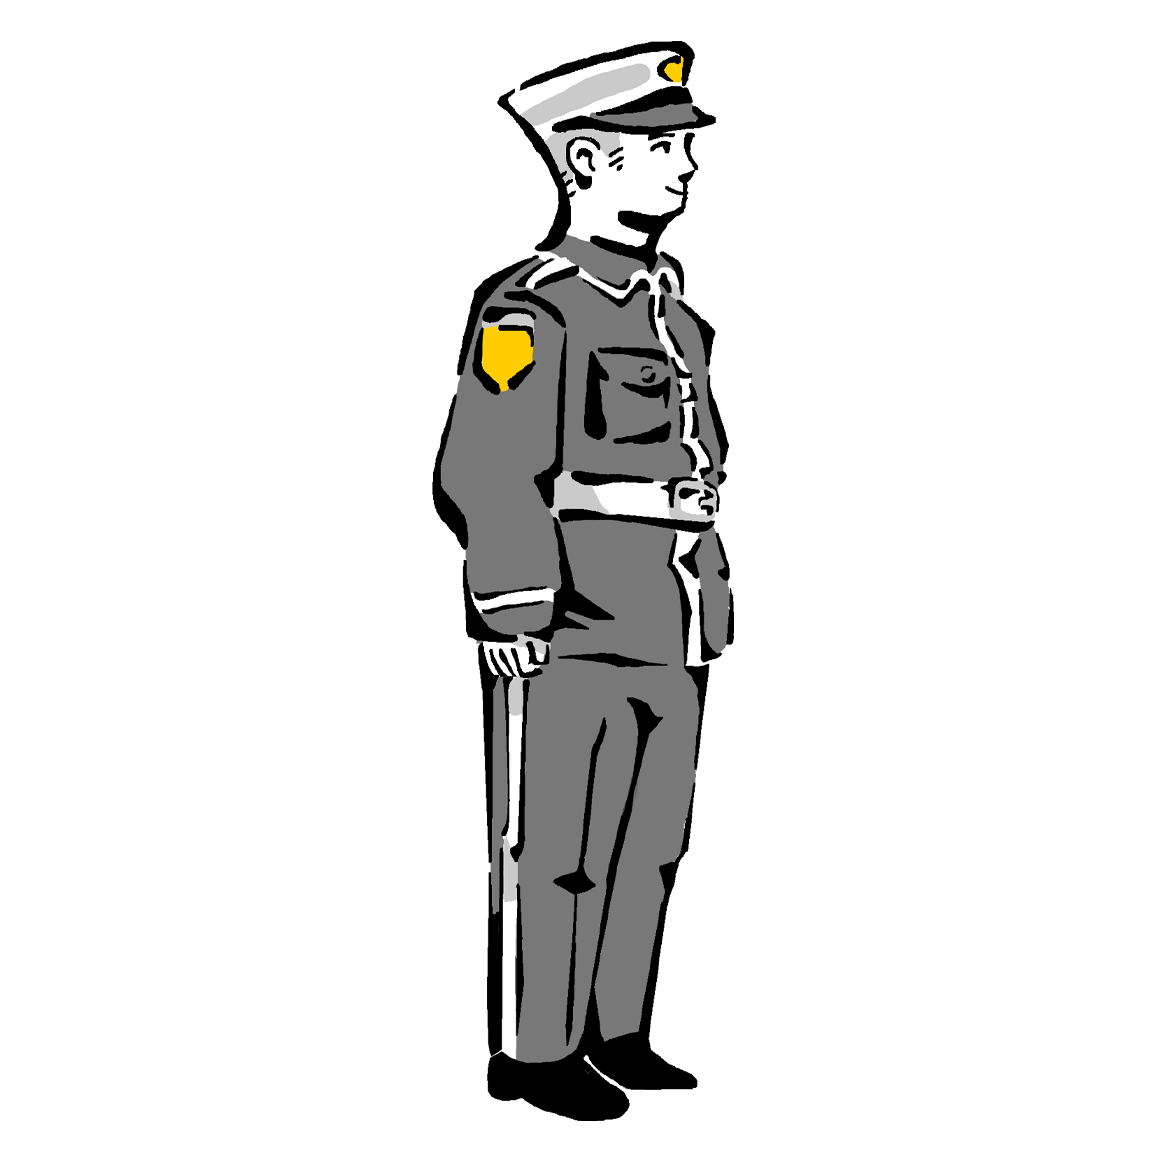 Military man in dress uniform standing at attention.